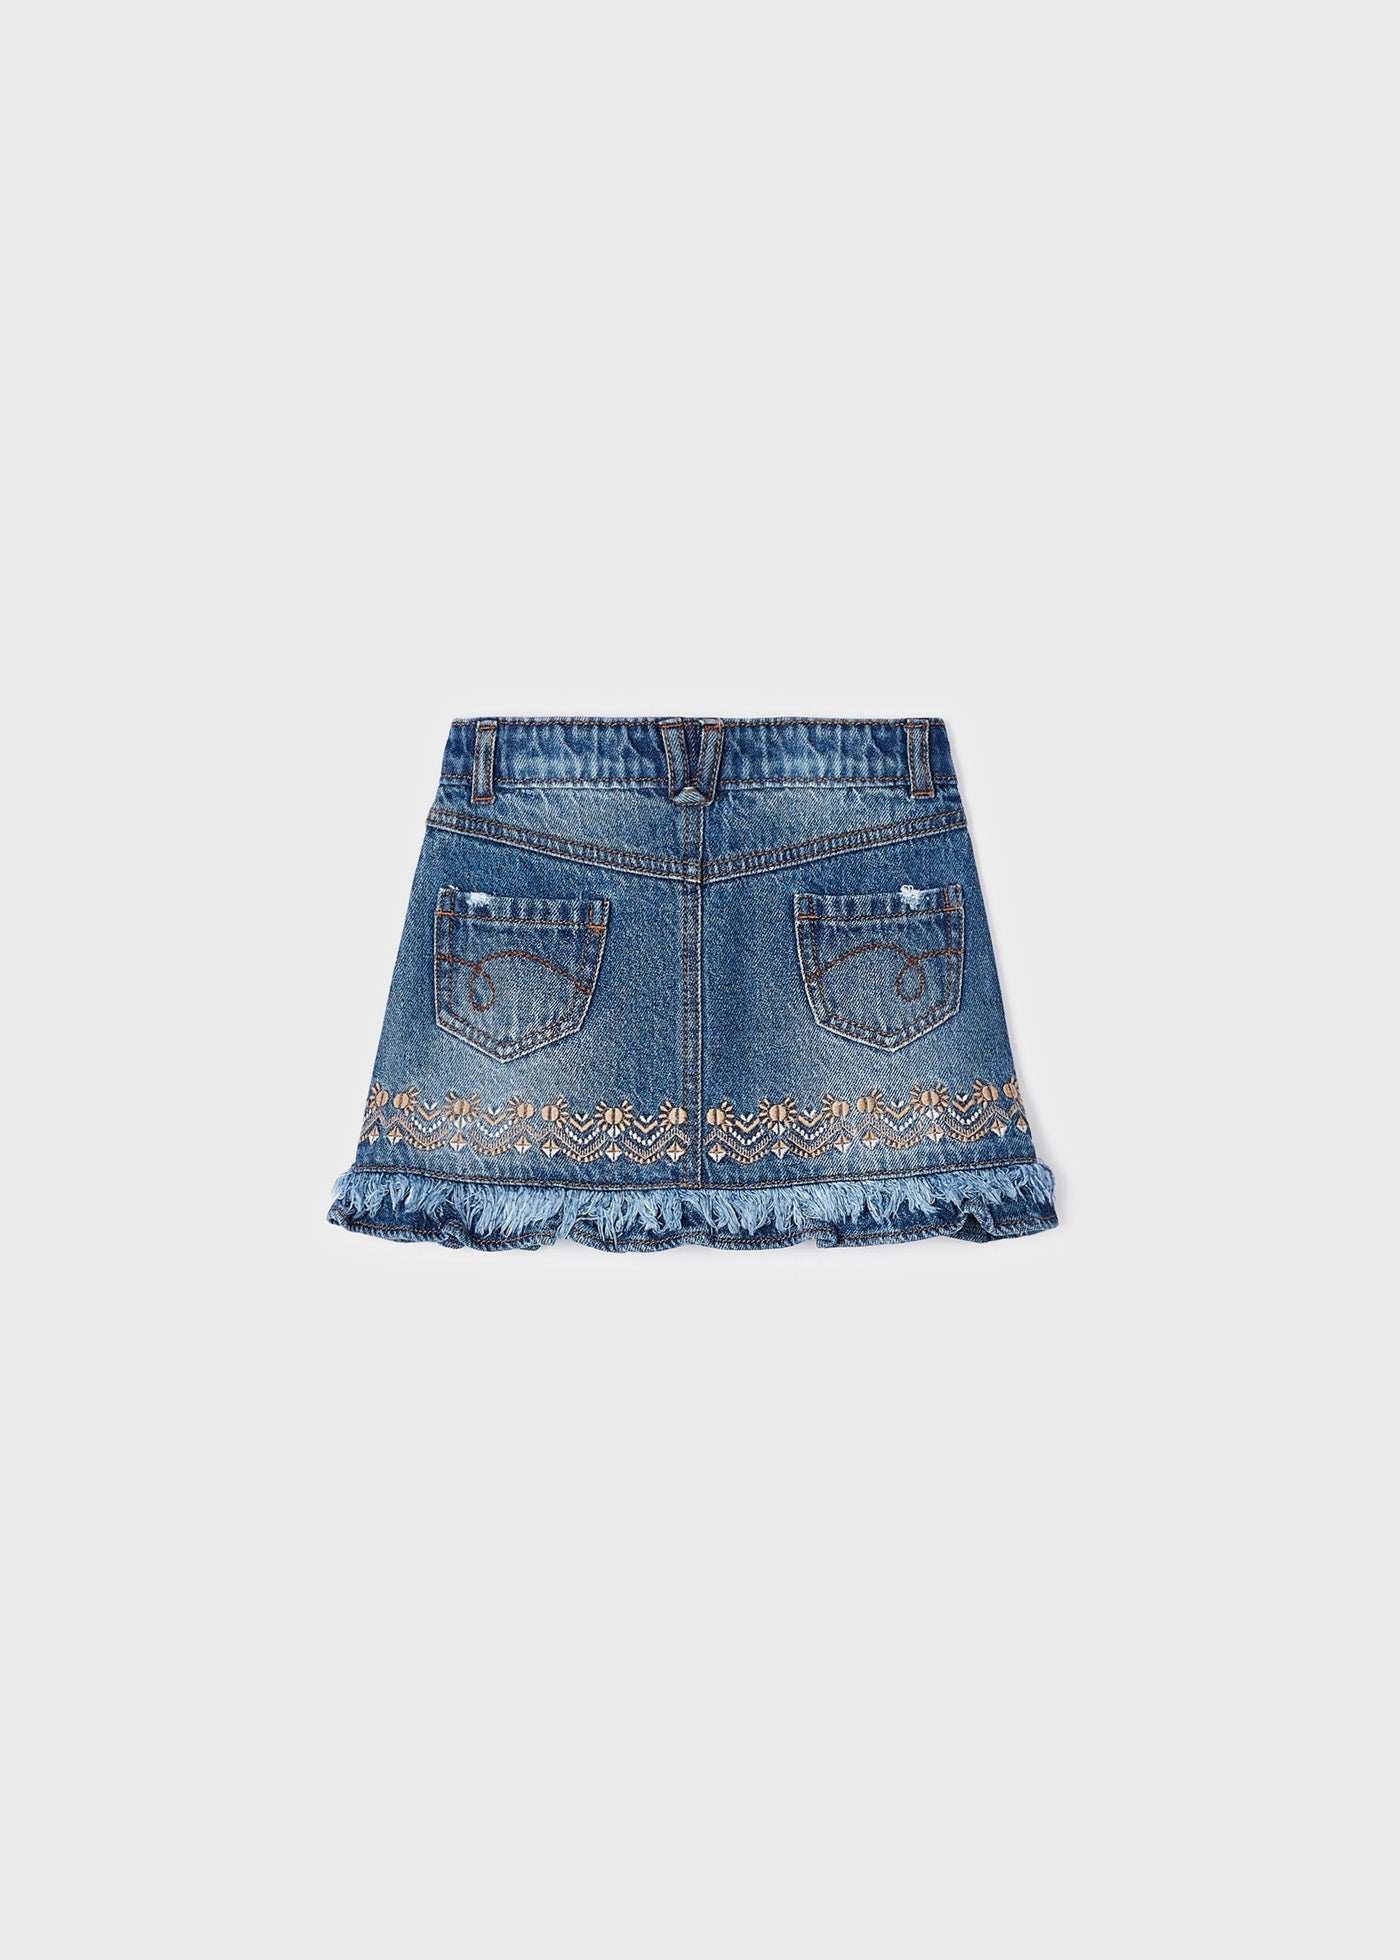 Mayoral Mini Demin Skirt w/Embroidery _Blue 3904-67